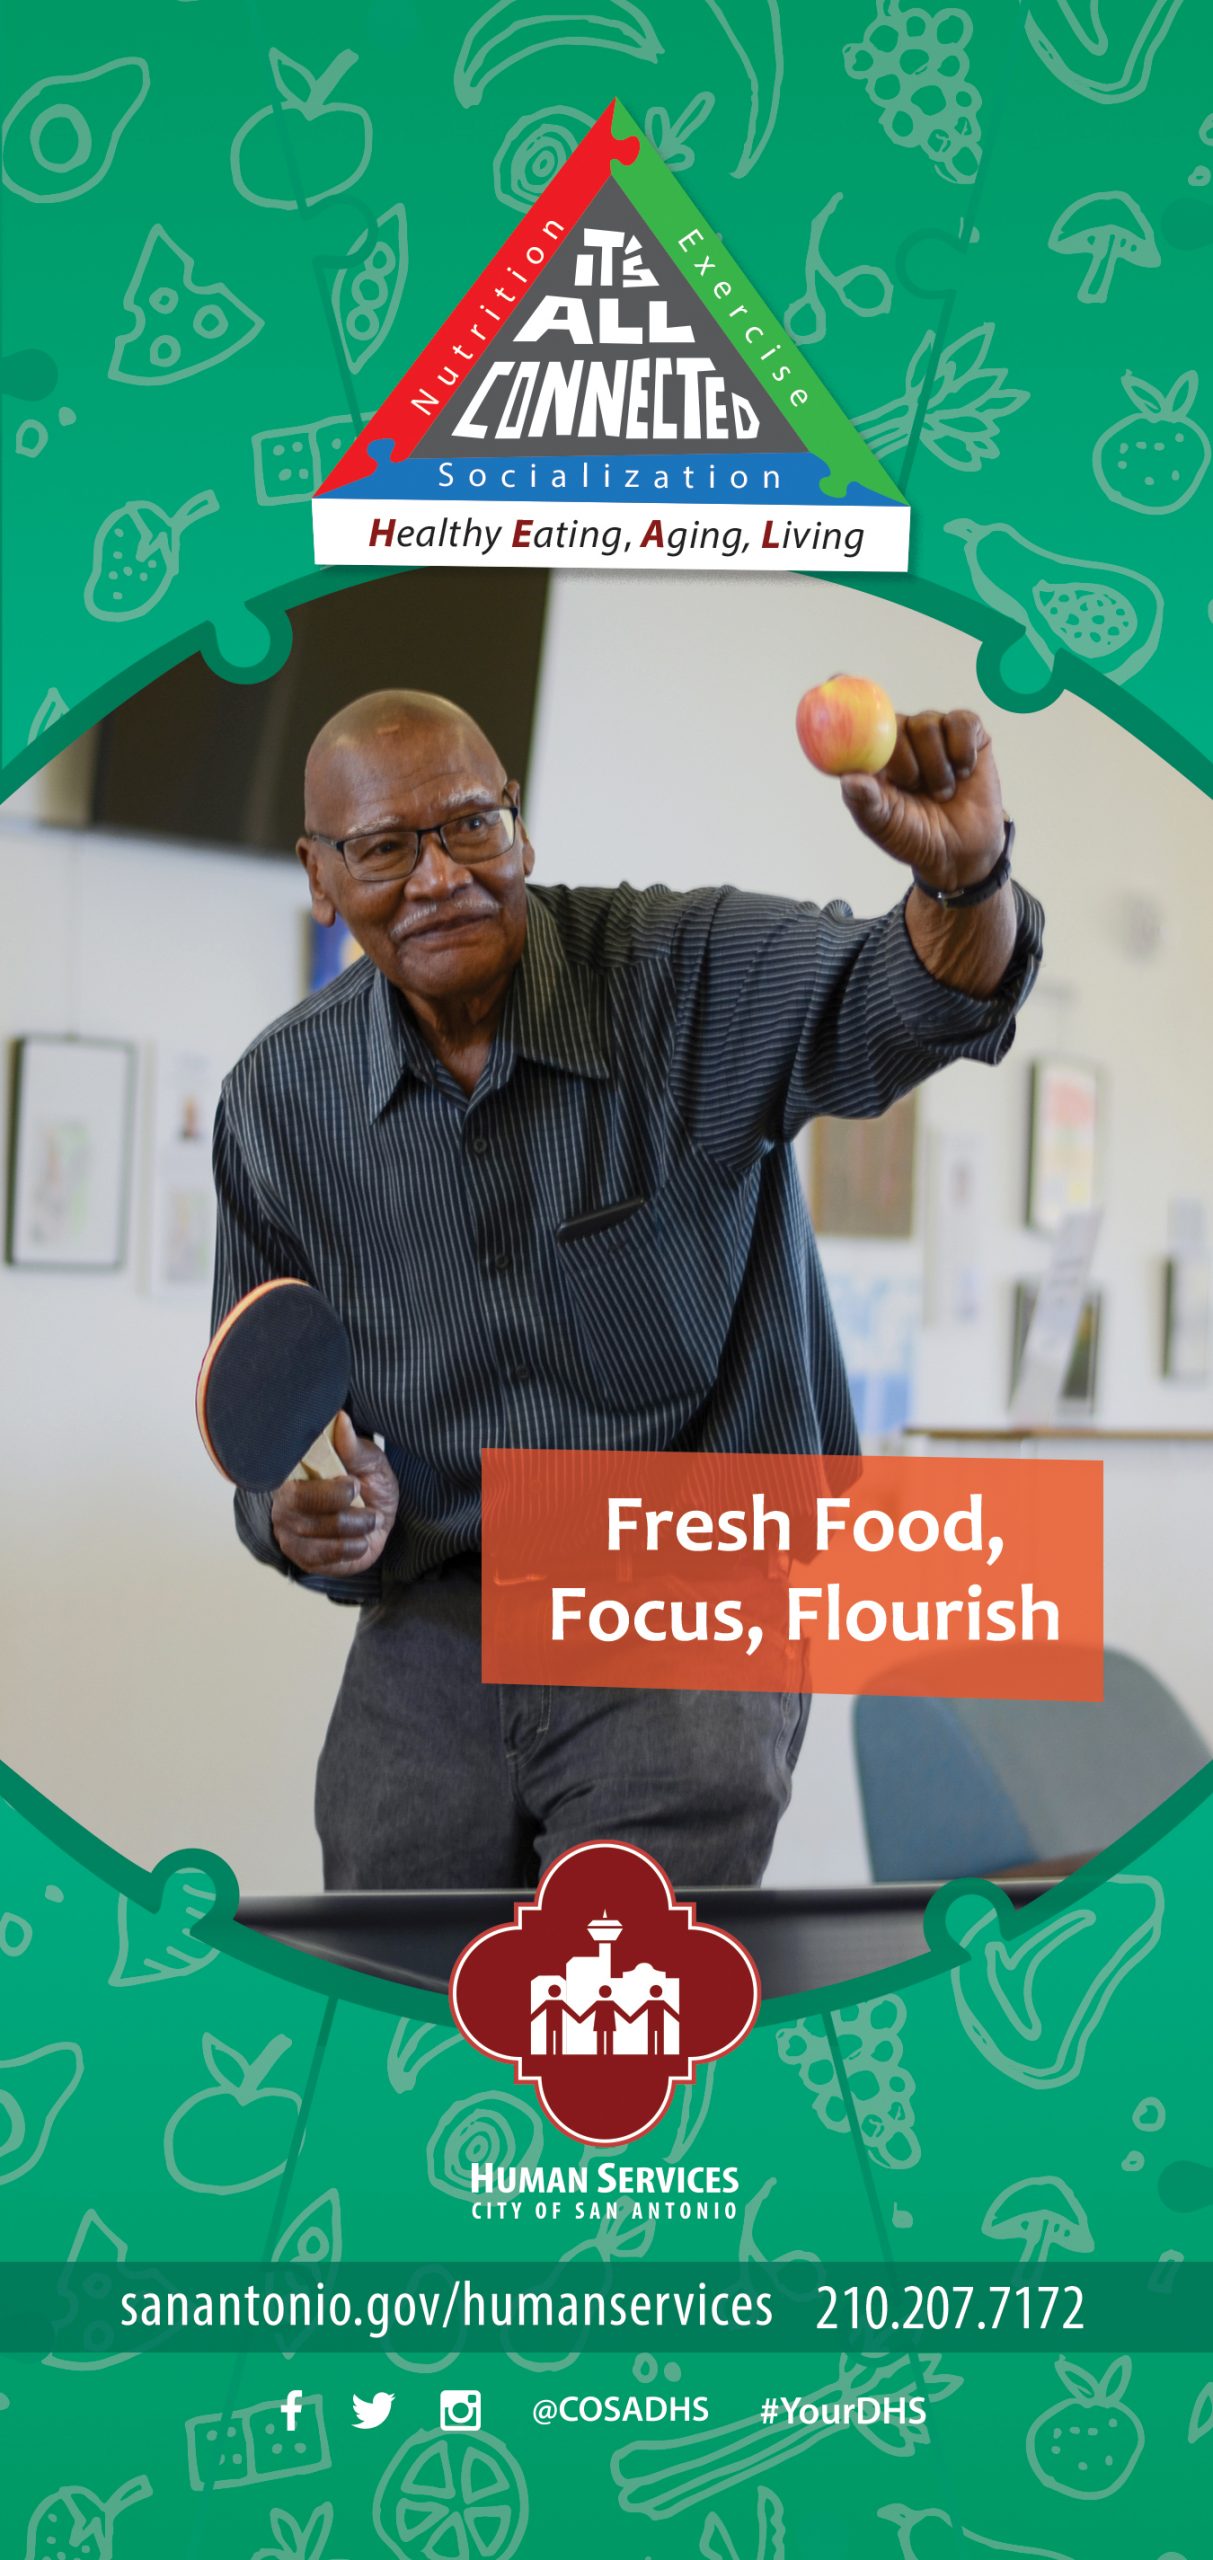 Image reads "It's all Connected Health Eating, Aging, Living. Fresh food, focus, flourish. sanantonio.gov/humanservices. (210) 207-7172